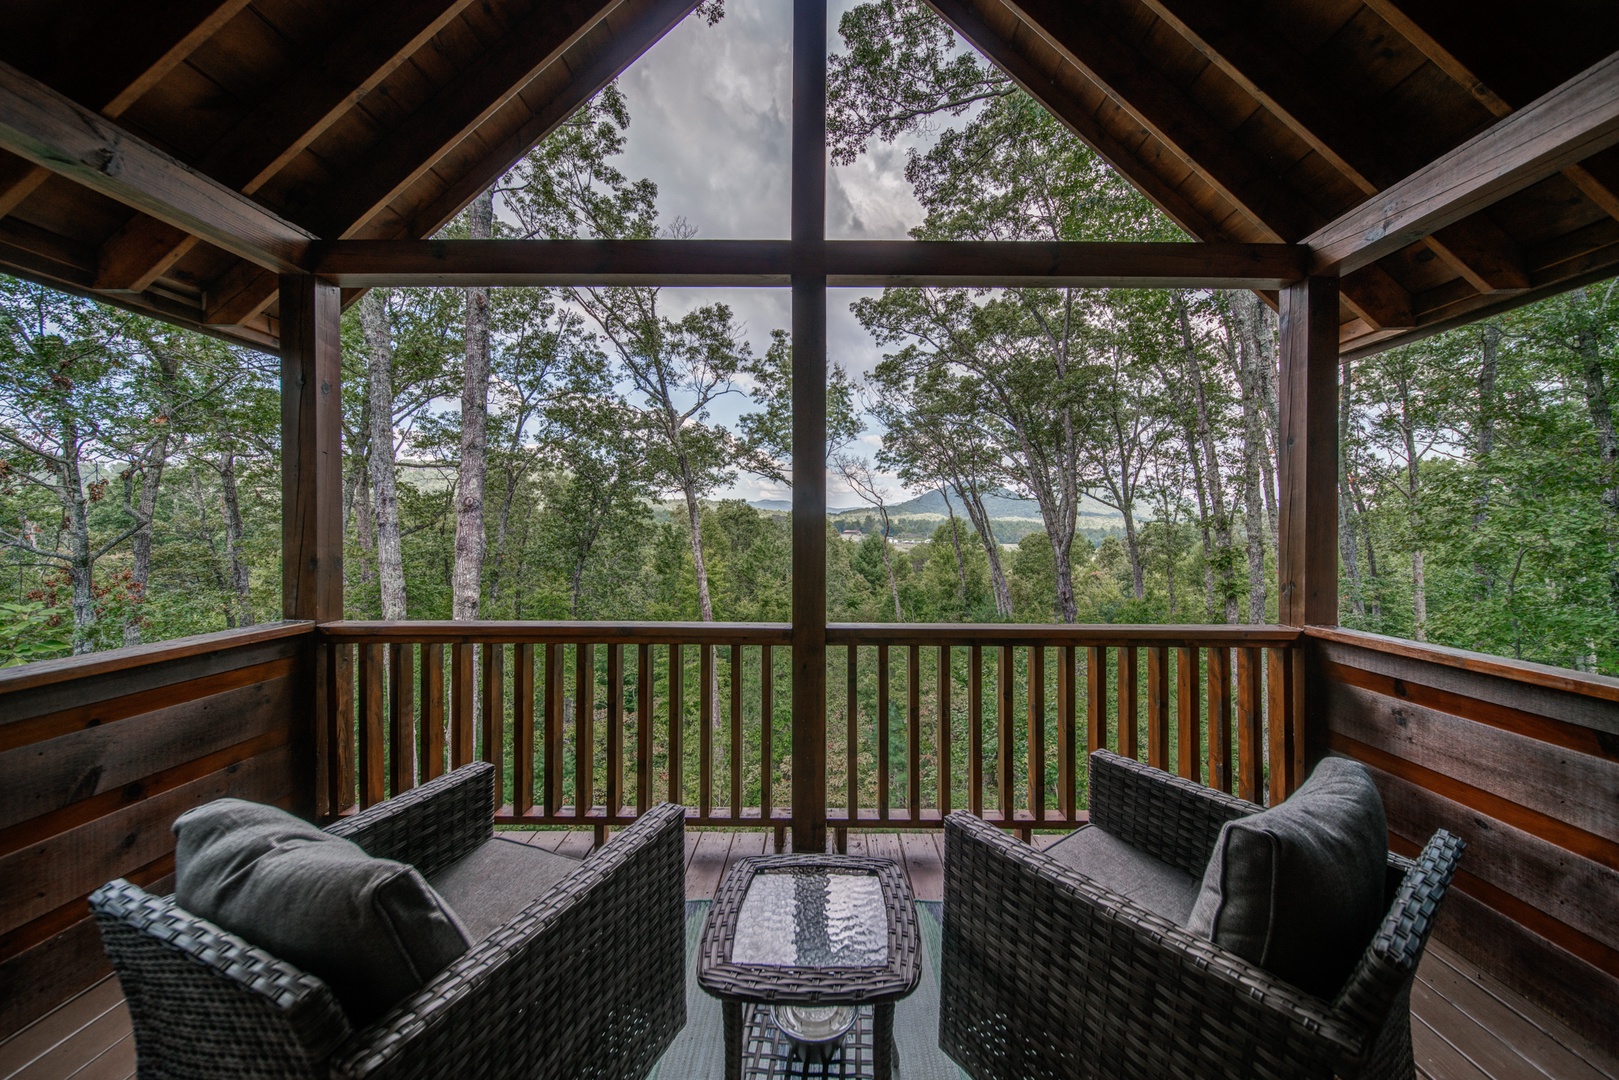 Take in the stunning views from the private master bedroom balcony